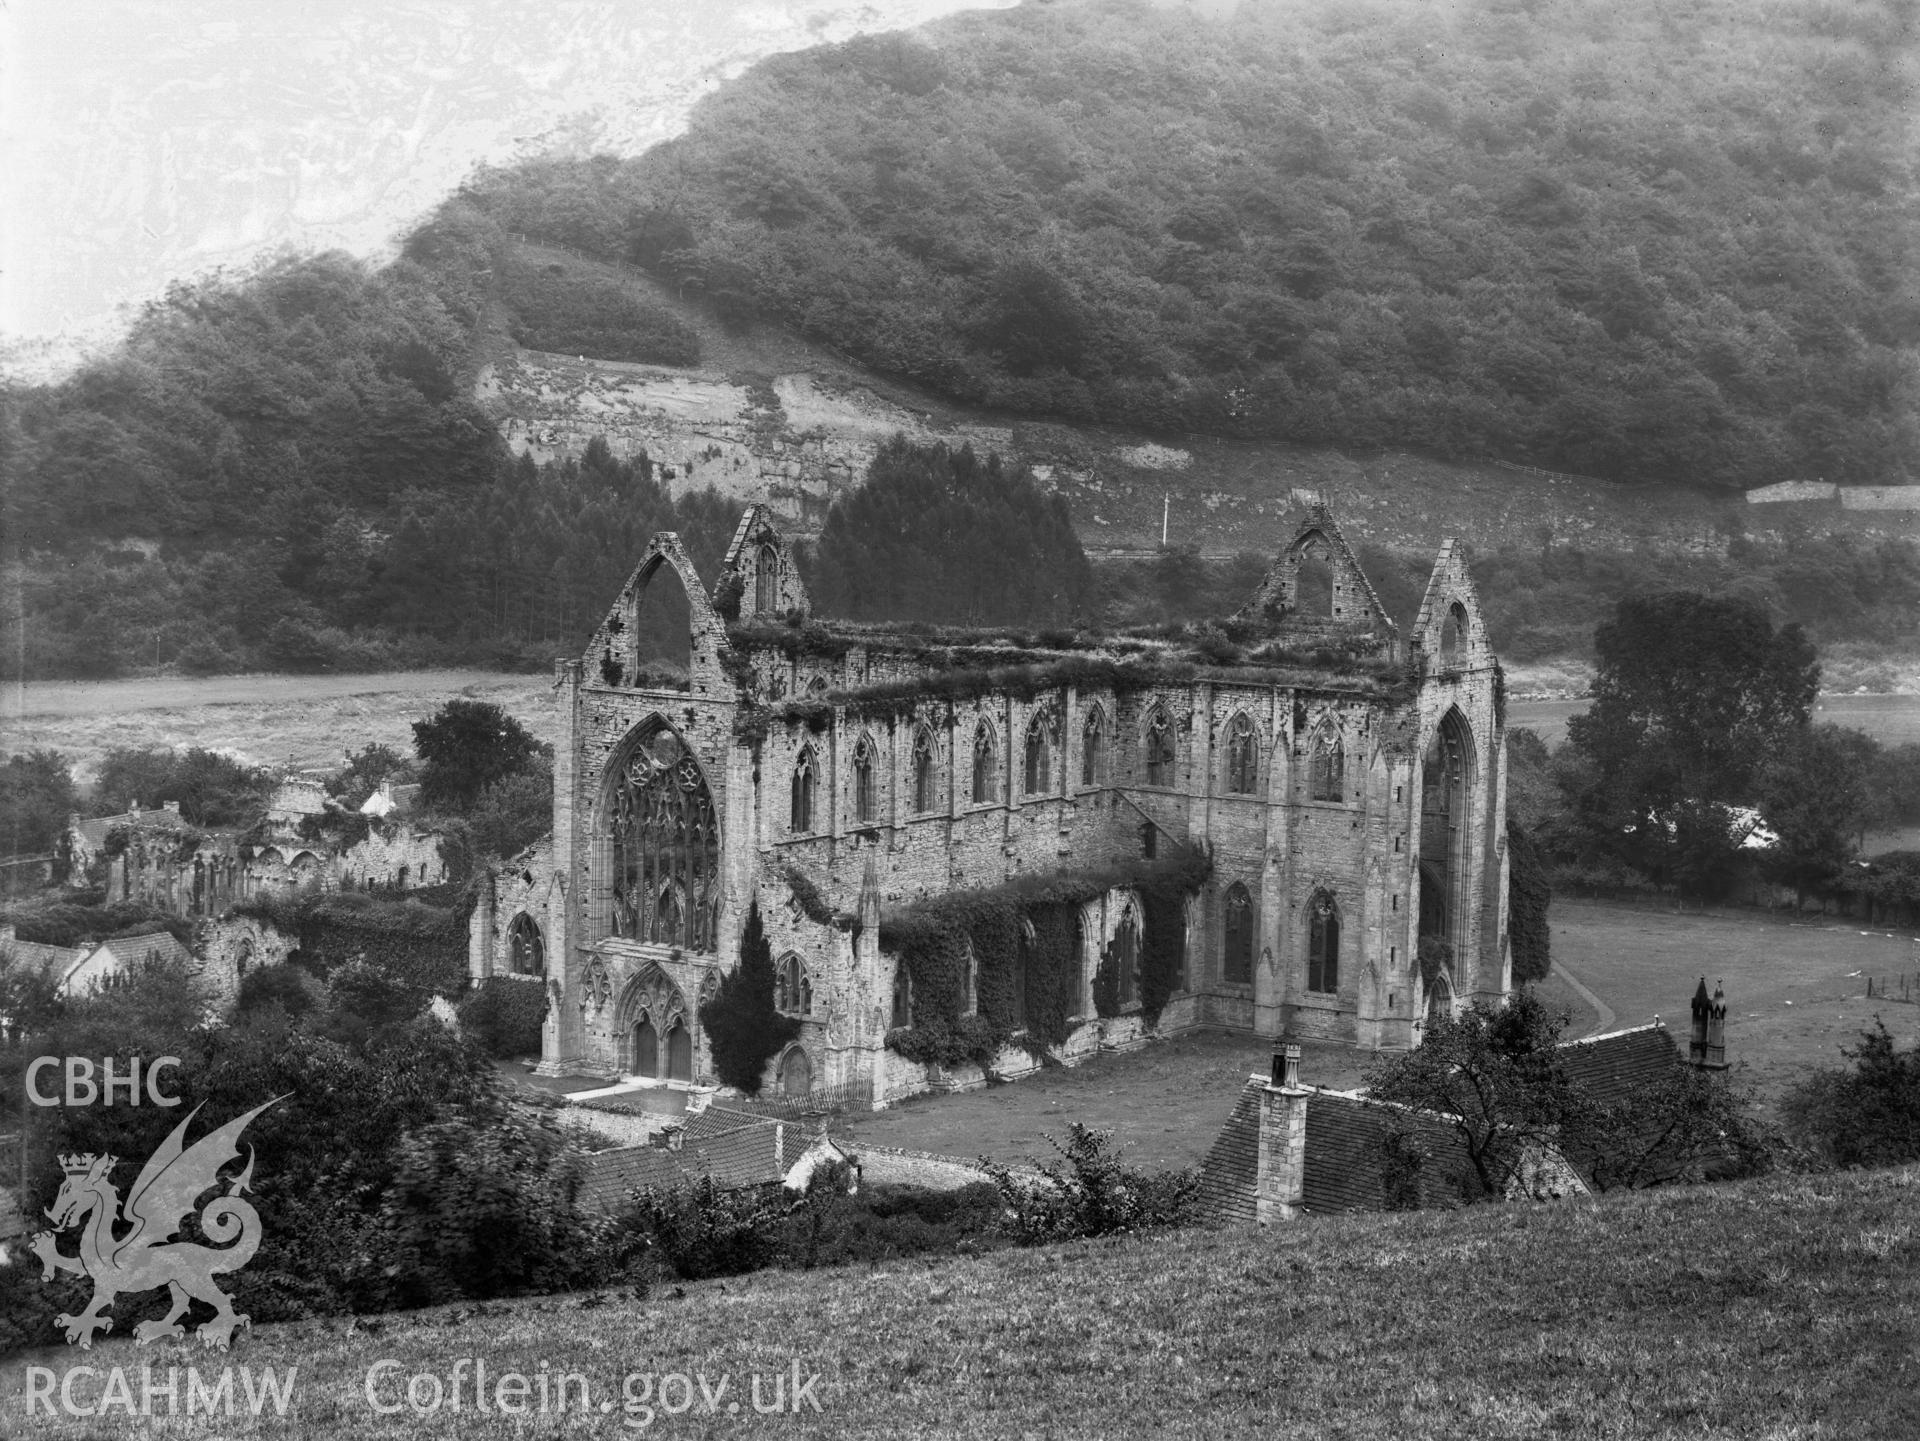 General view of Tintern Abbey, taken from an elevated postion.